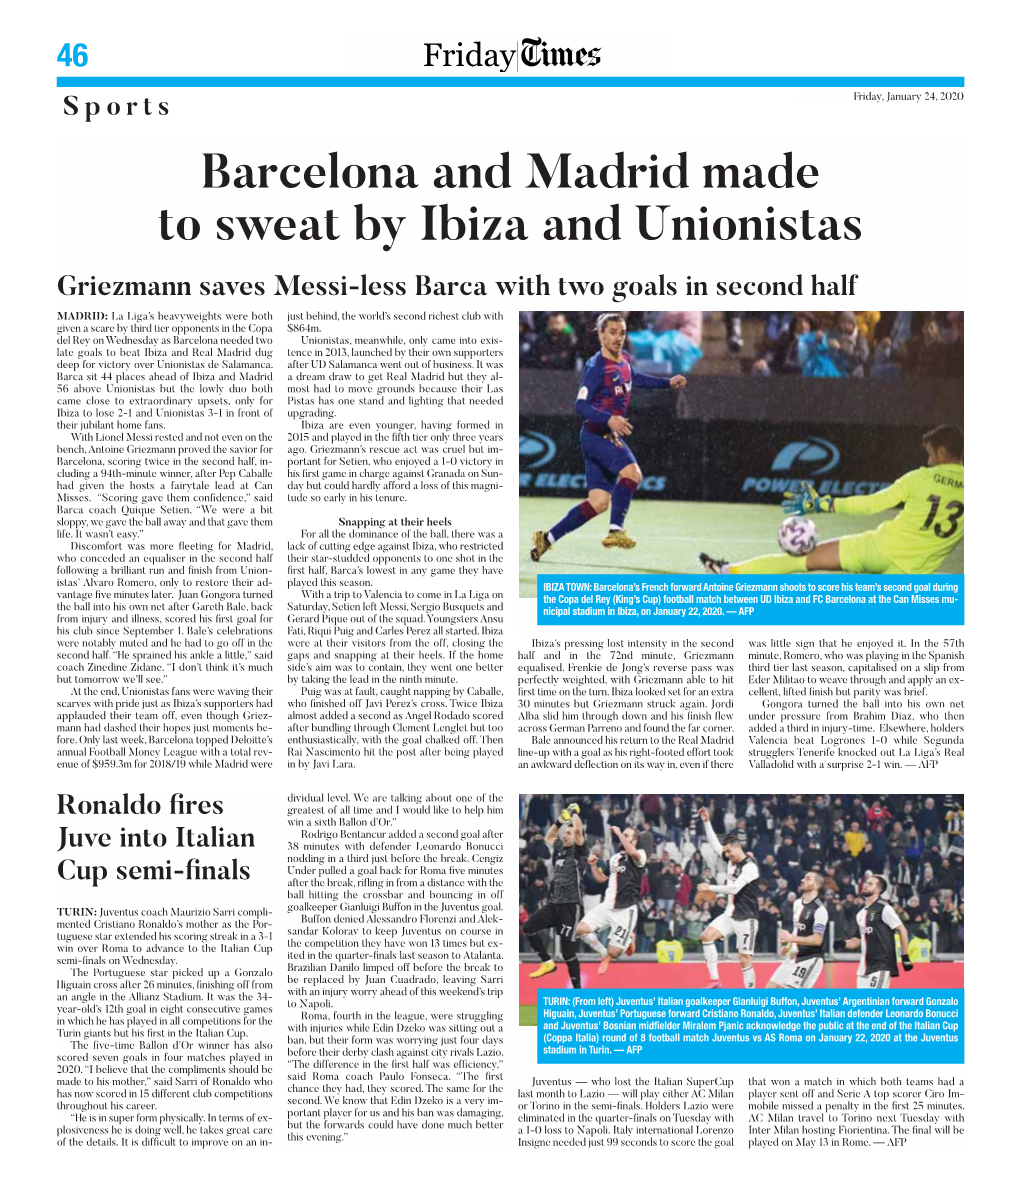 Barcelona and Madrid Made to Sweat by Ibiza and Unionistas